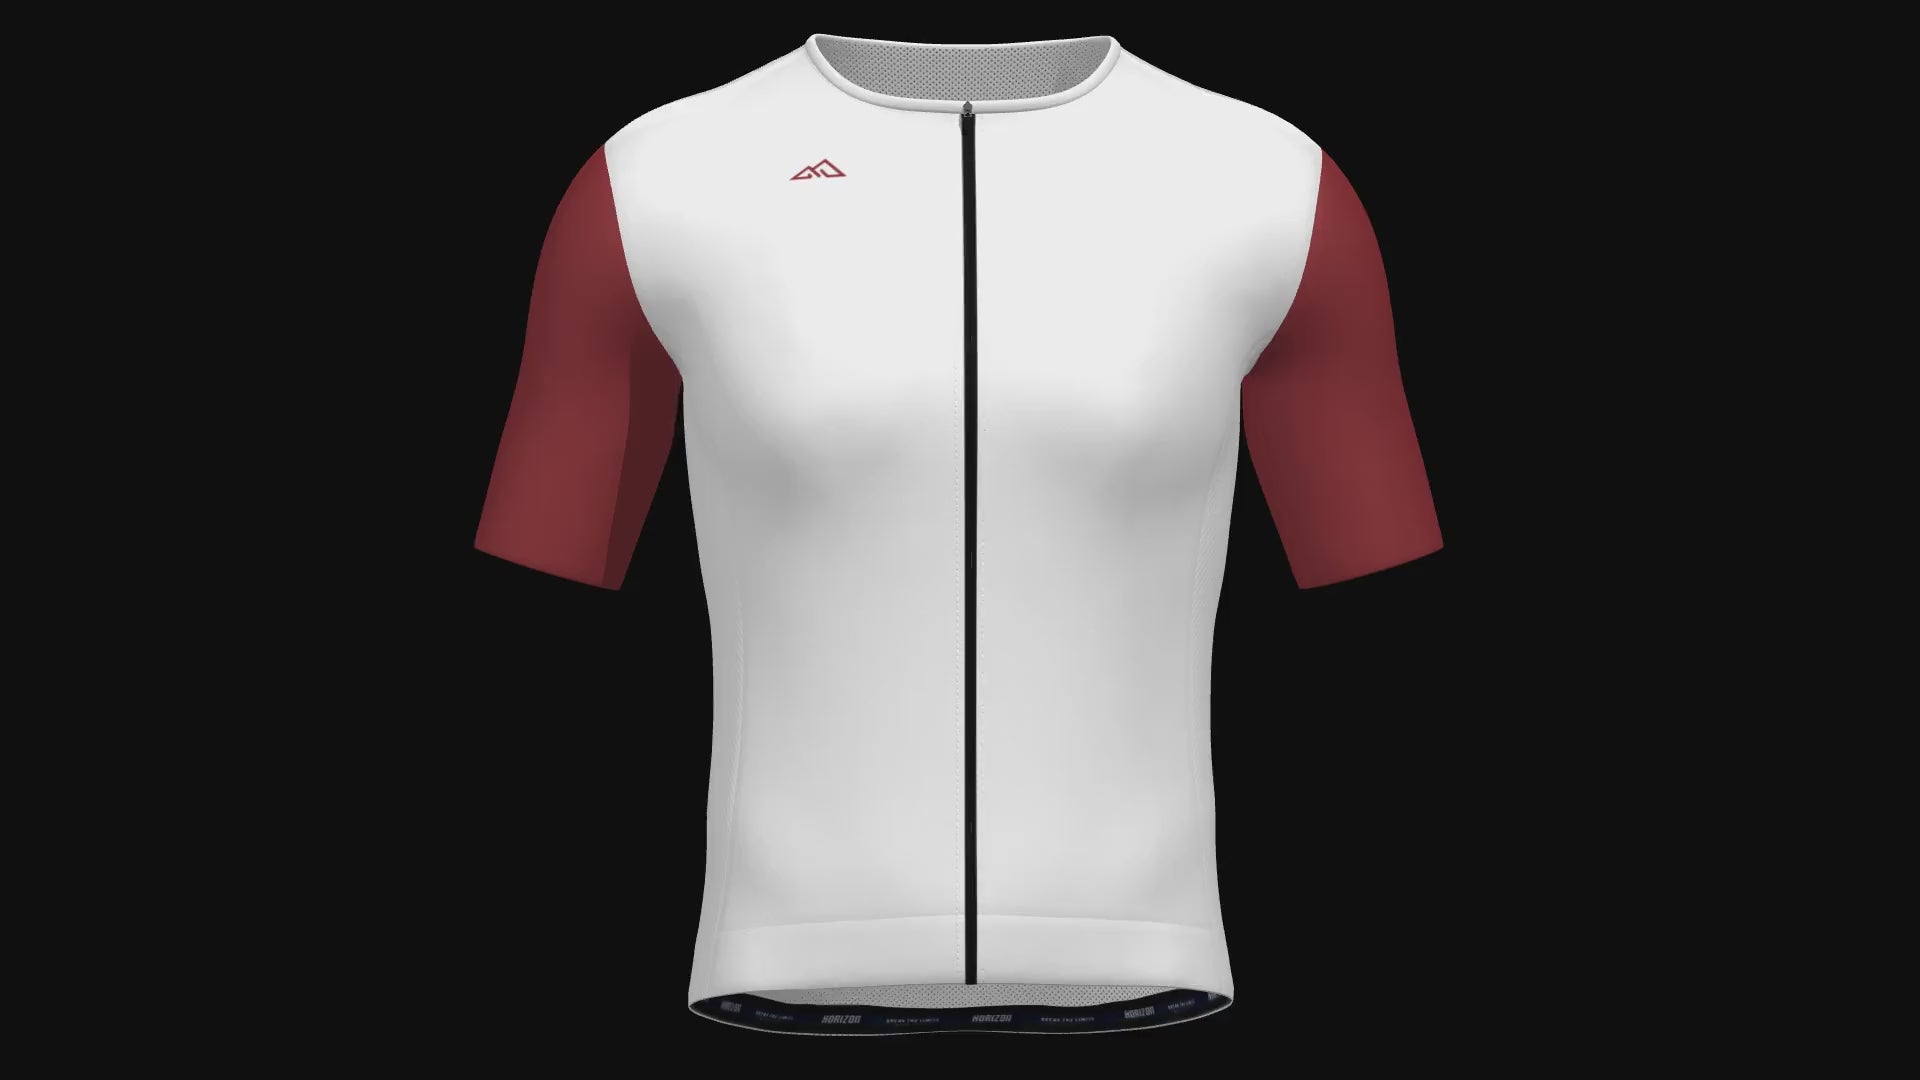 MAILLOT VELOCE UNISEX SEVILLE - COLECCIÓN FARALAES